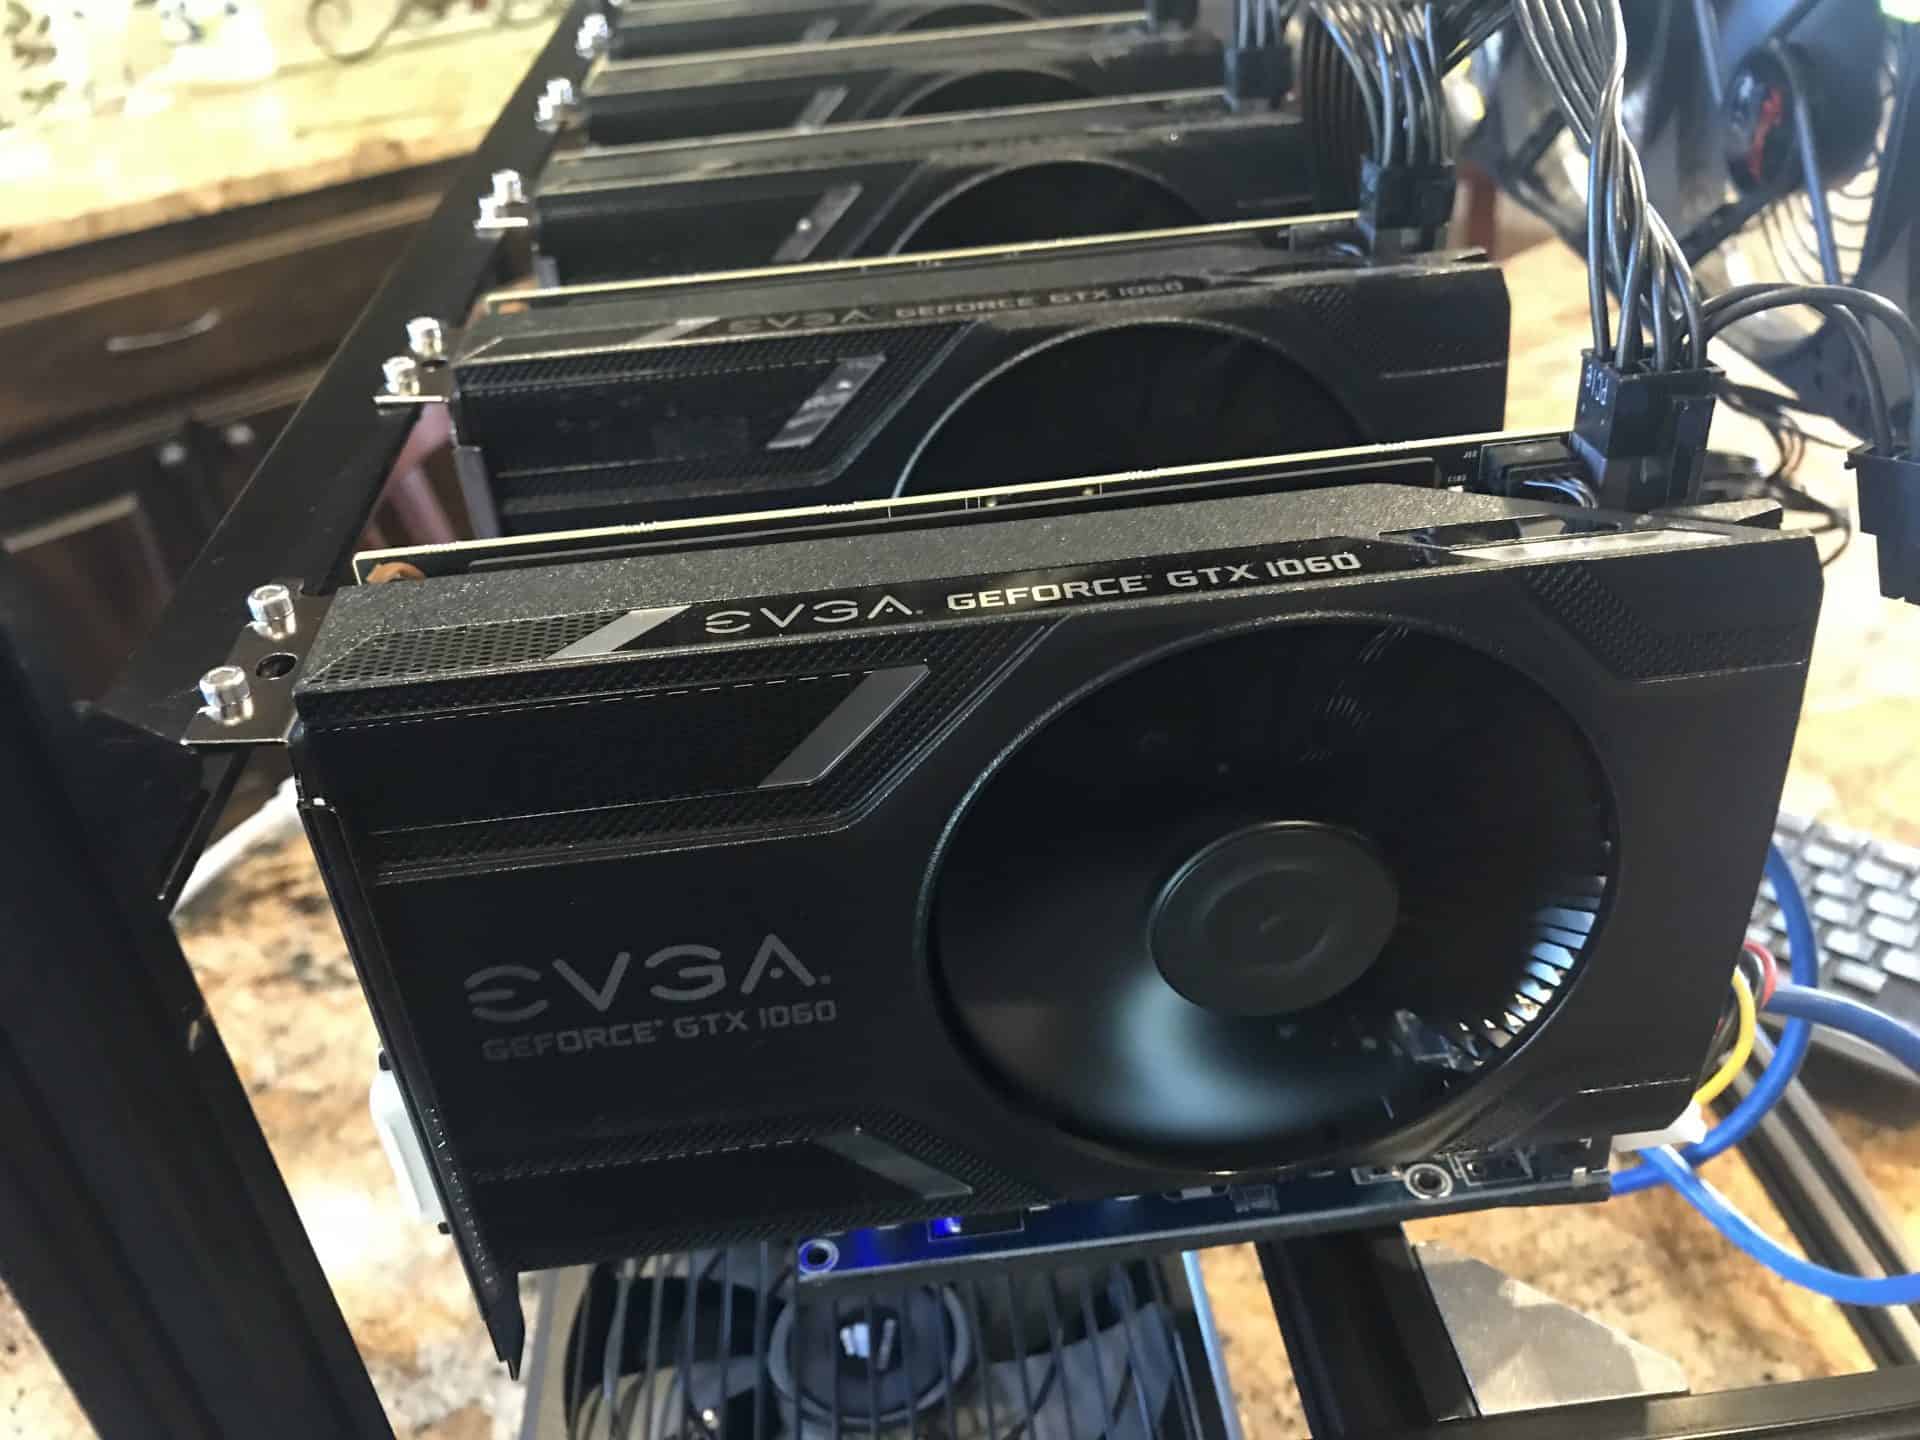 can you mine cryptocurrency with dual gtx 760s